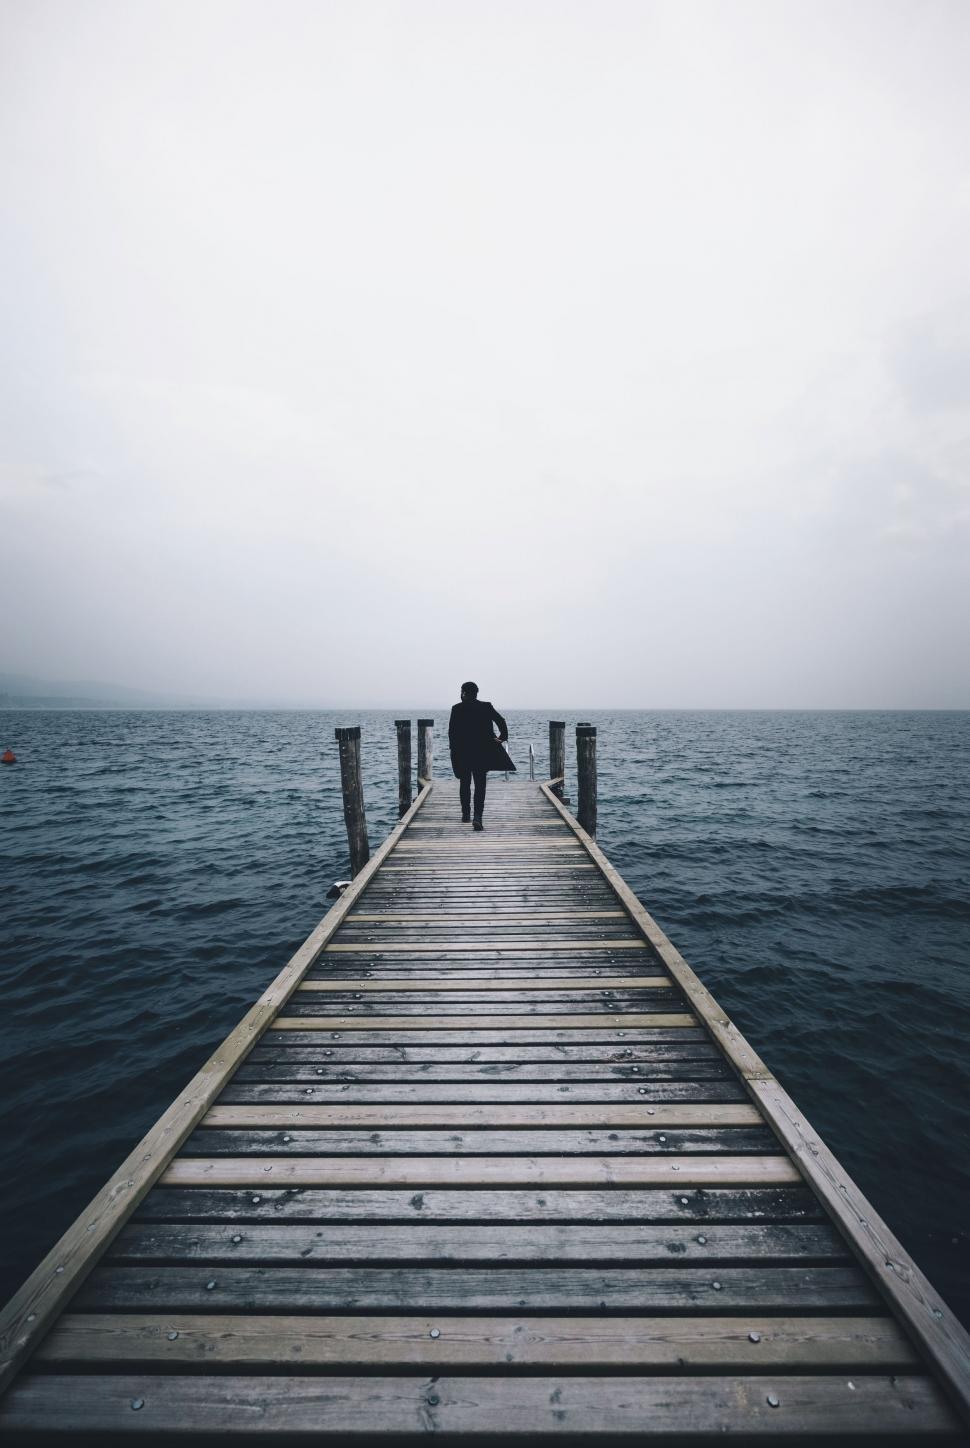 Free Image of Person Standing on Pier in Middle of Ocean 